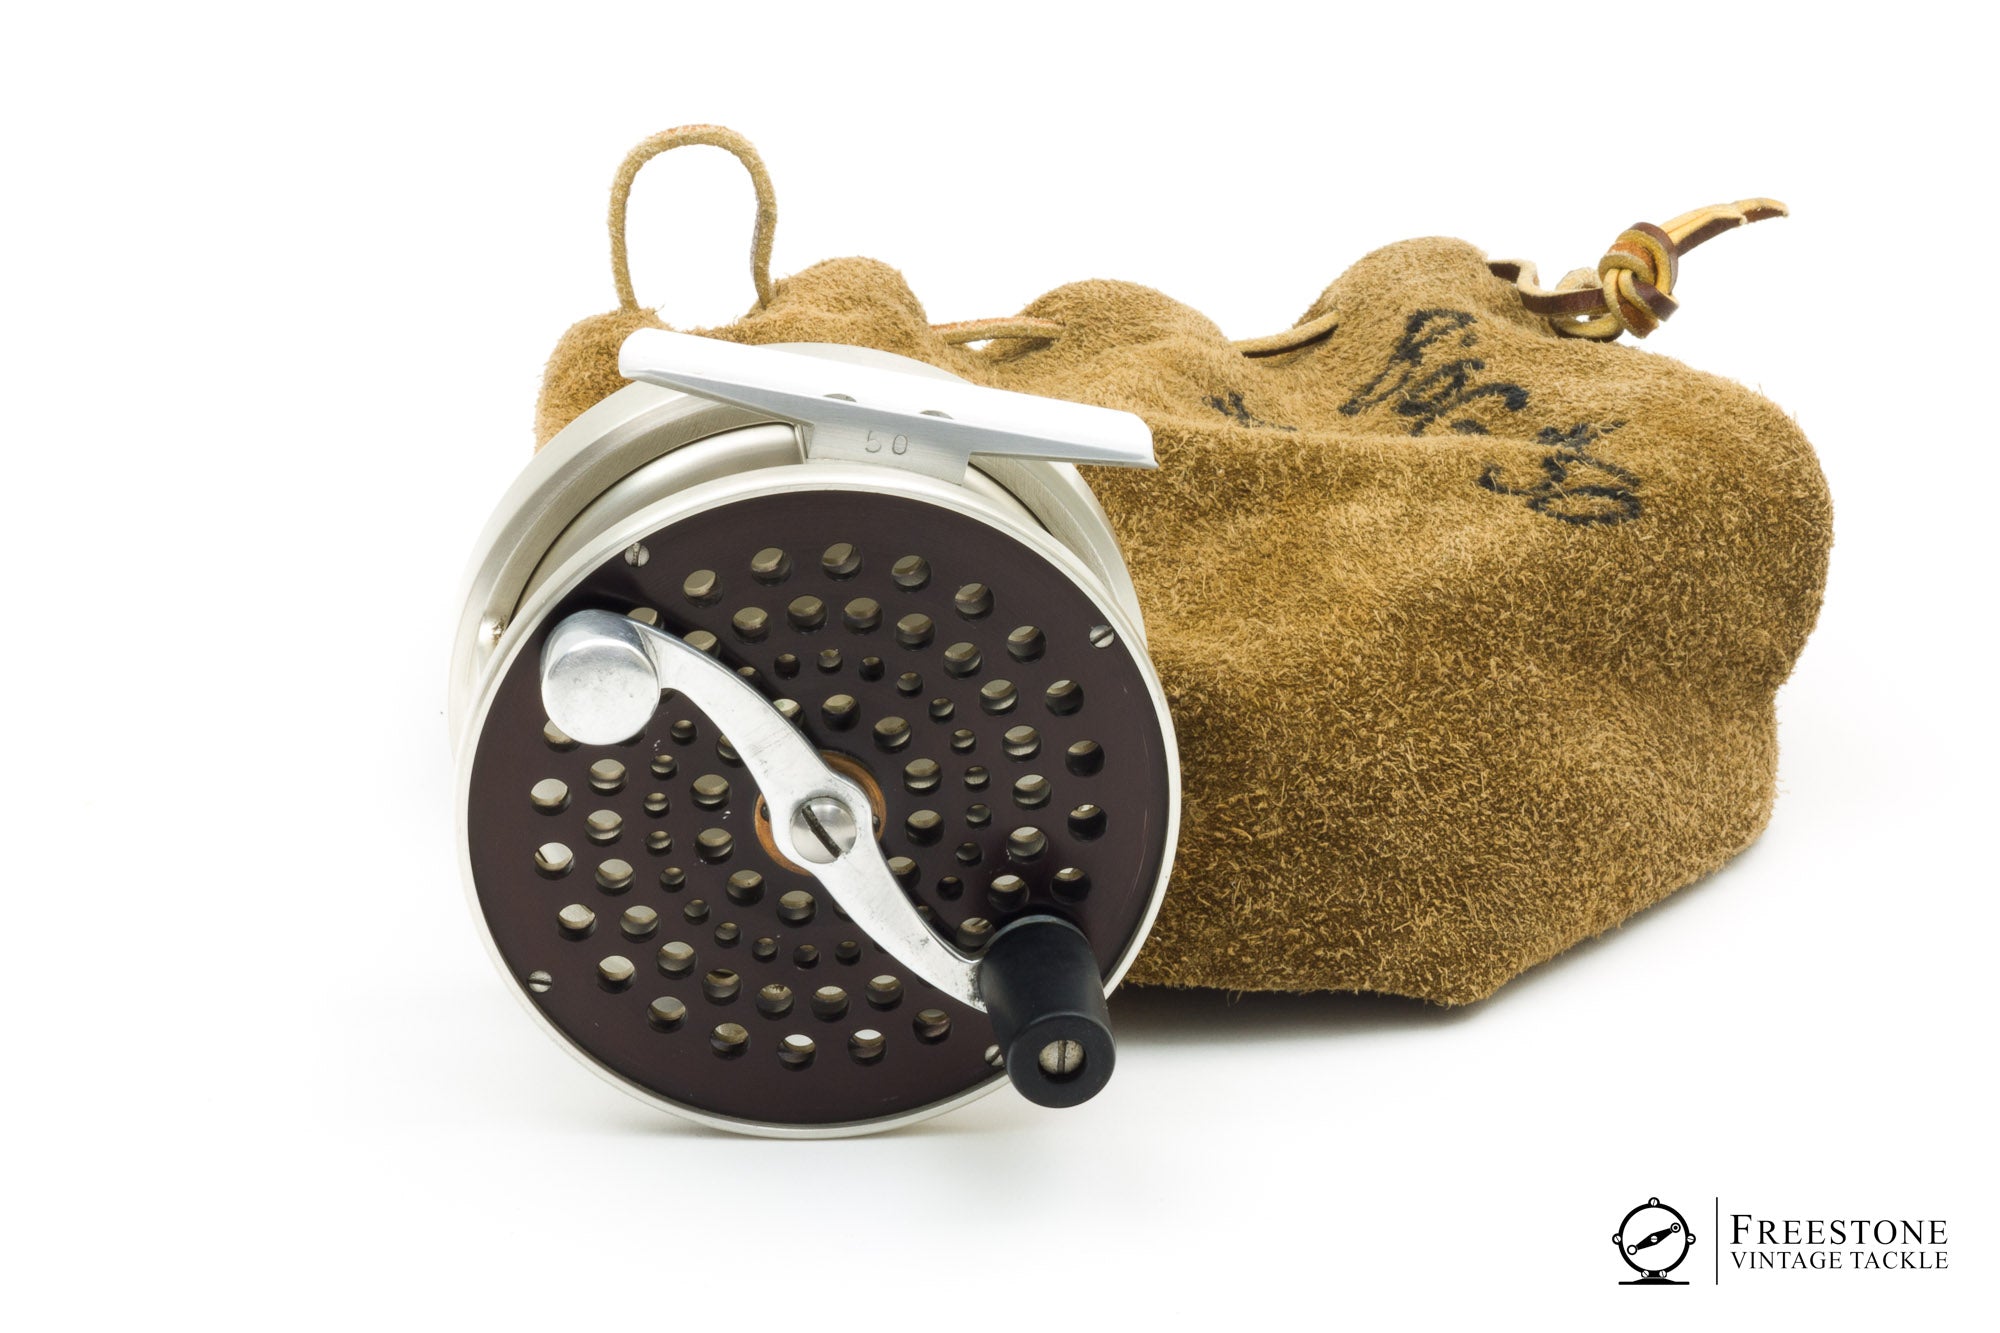 West Slope Classic Fly Tackle - Bogdan - A&F Salmon Reel Model 200